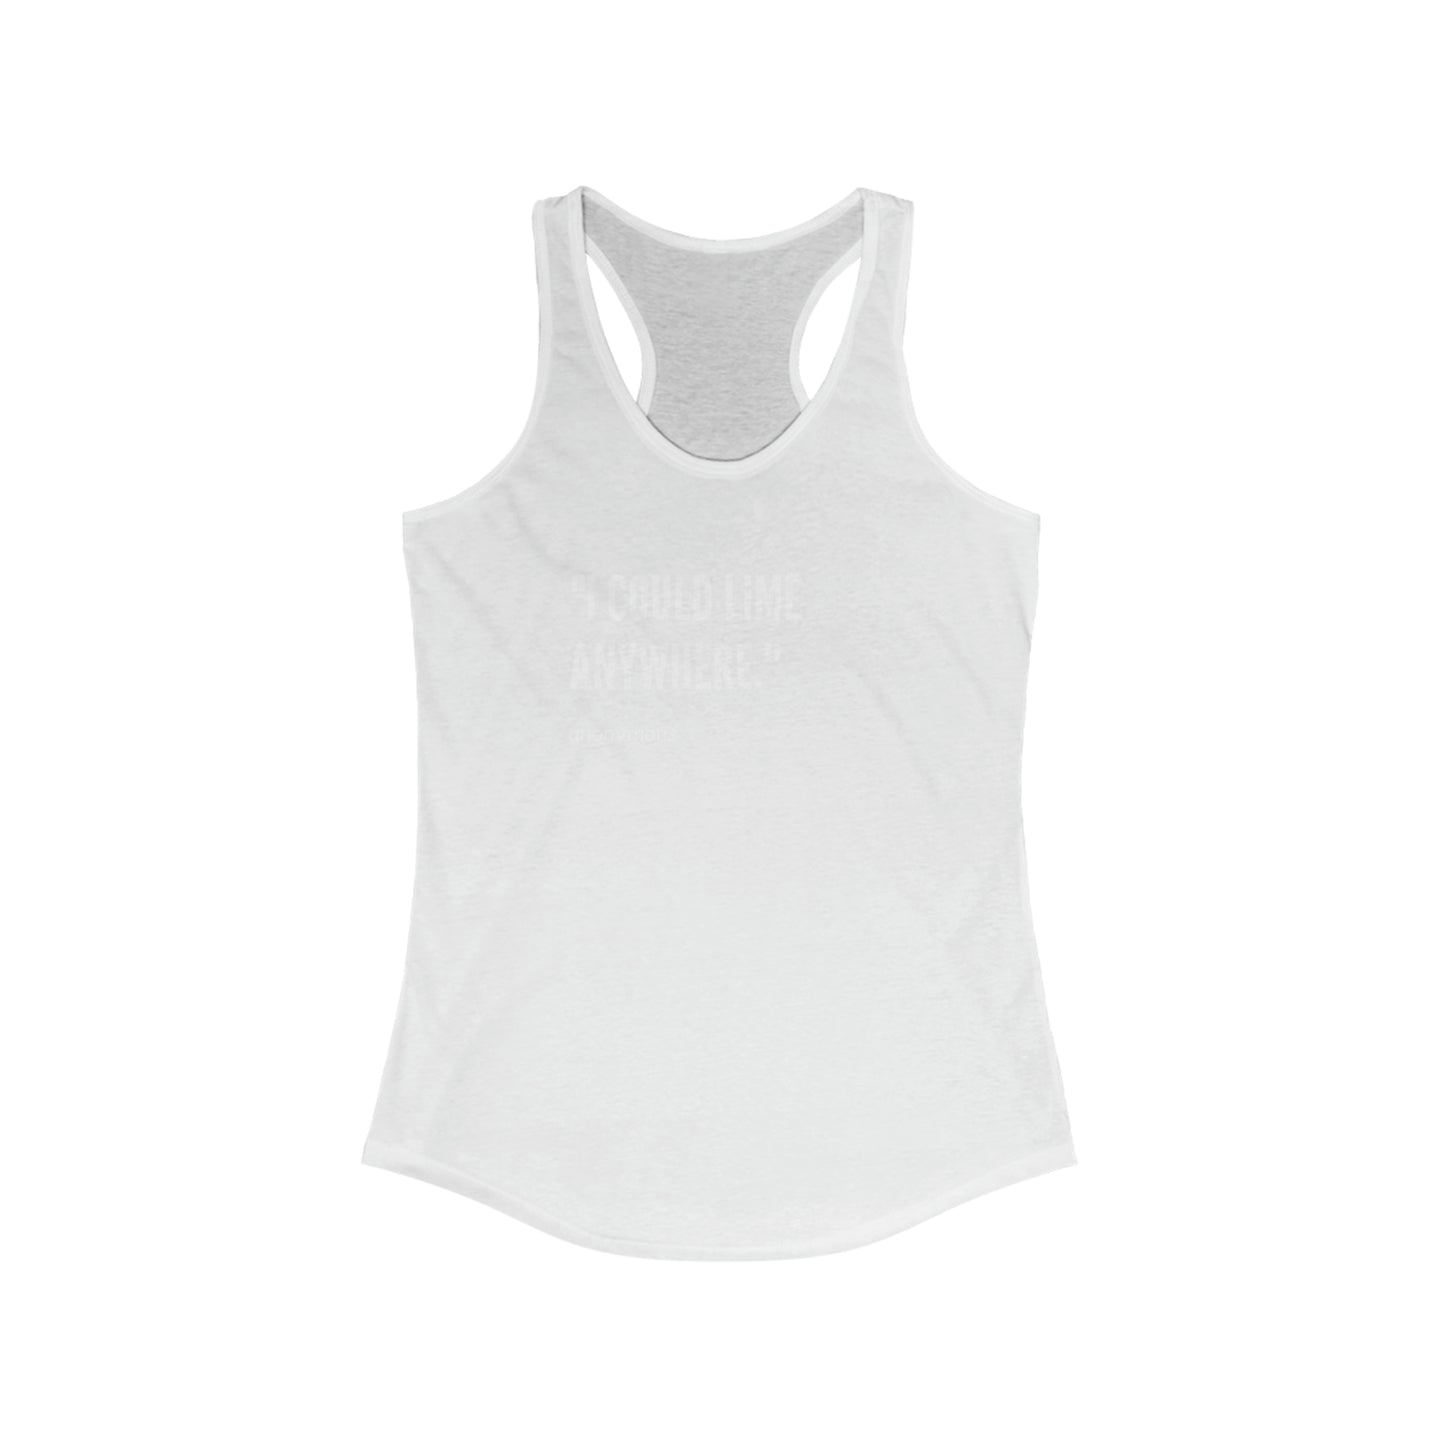 I could lime anywhere Women's Ideal Racerback Tank